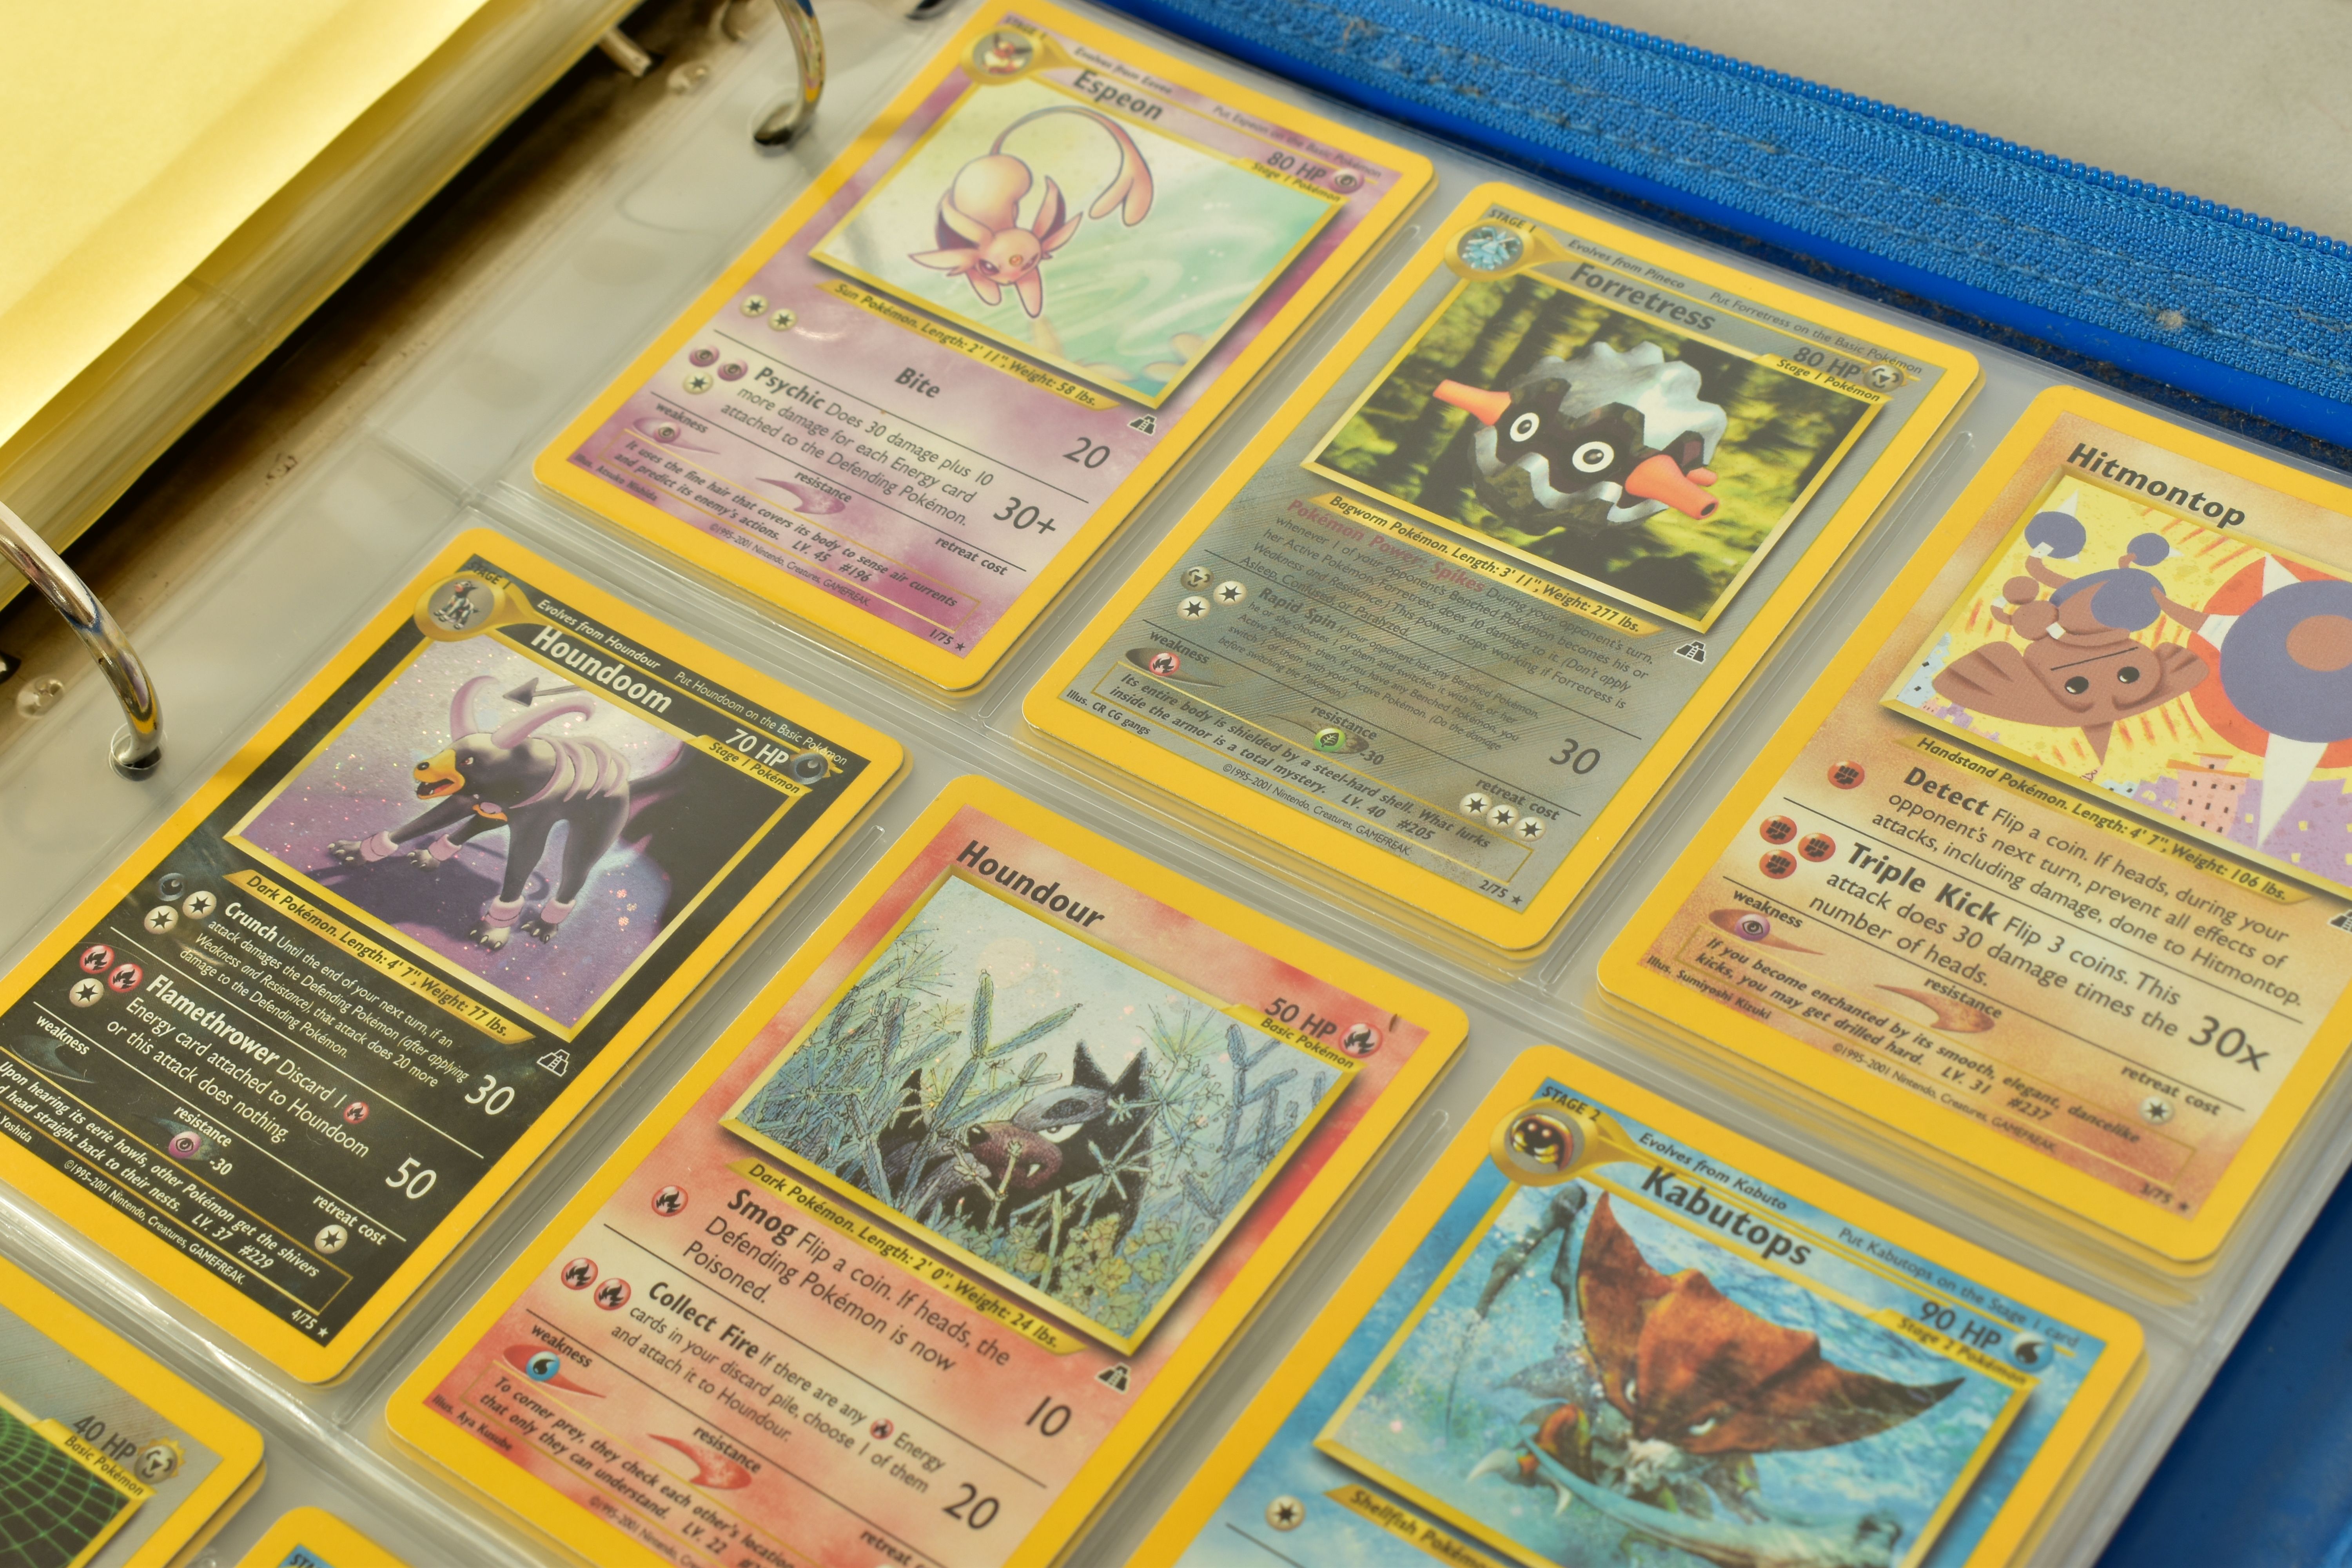 THE COMPLETE POKEMON CARD NEO GENESIS AND NEO DISCOVERY SETS, containing many first edition cards. - Image 21 of 32